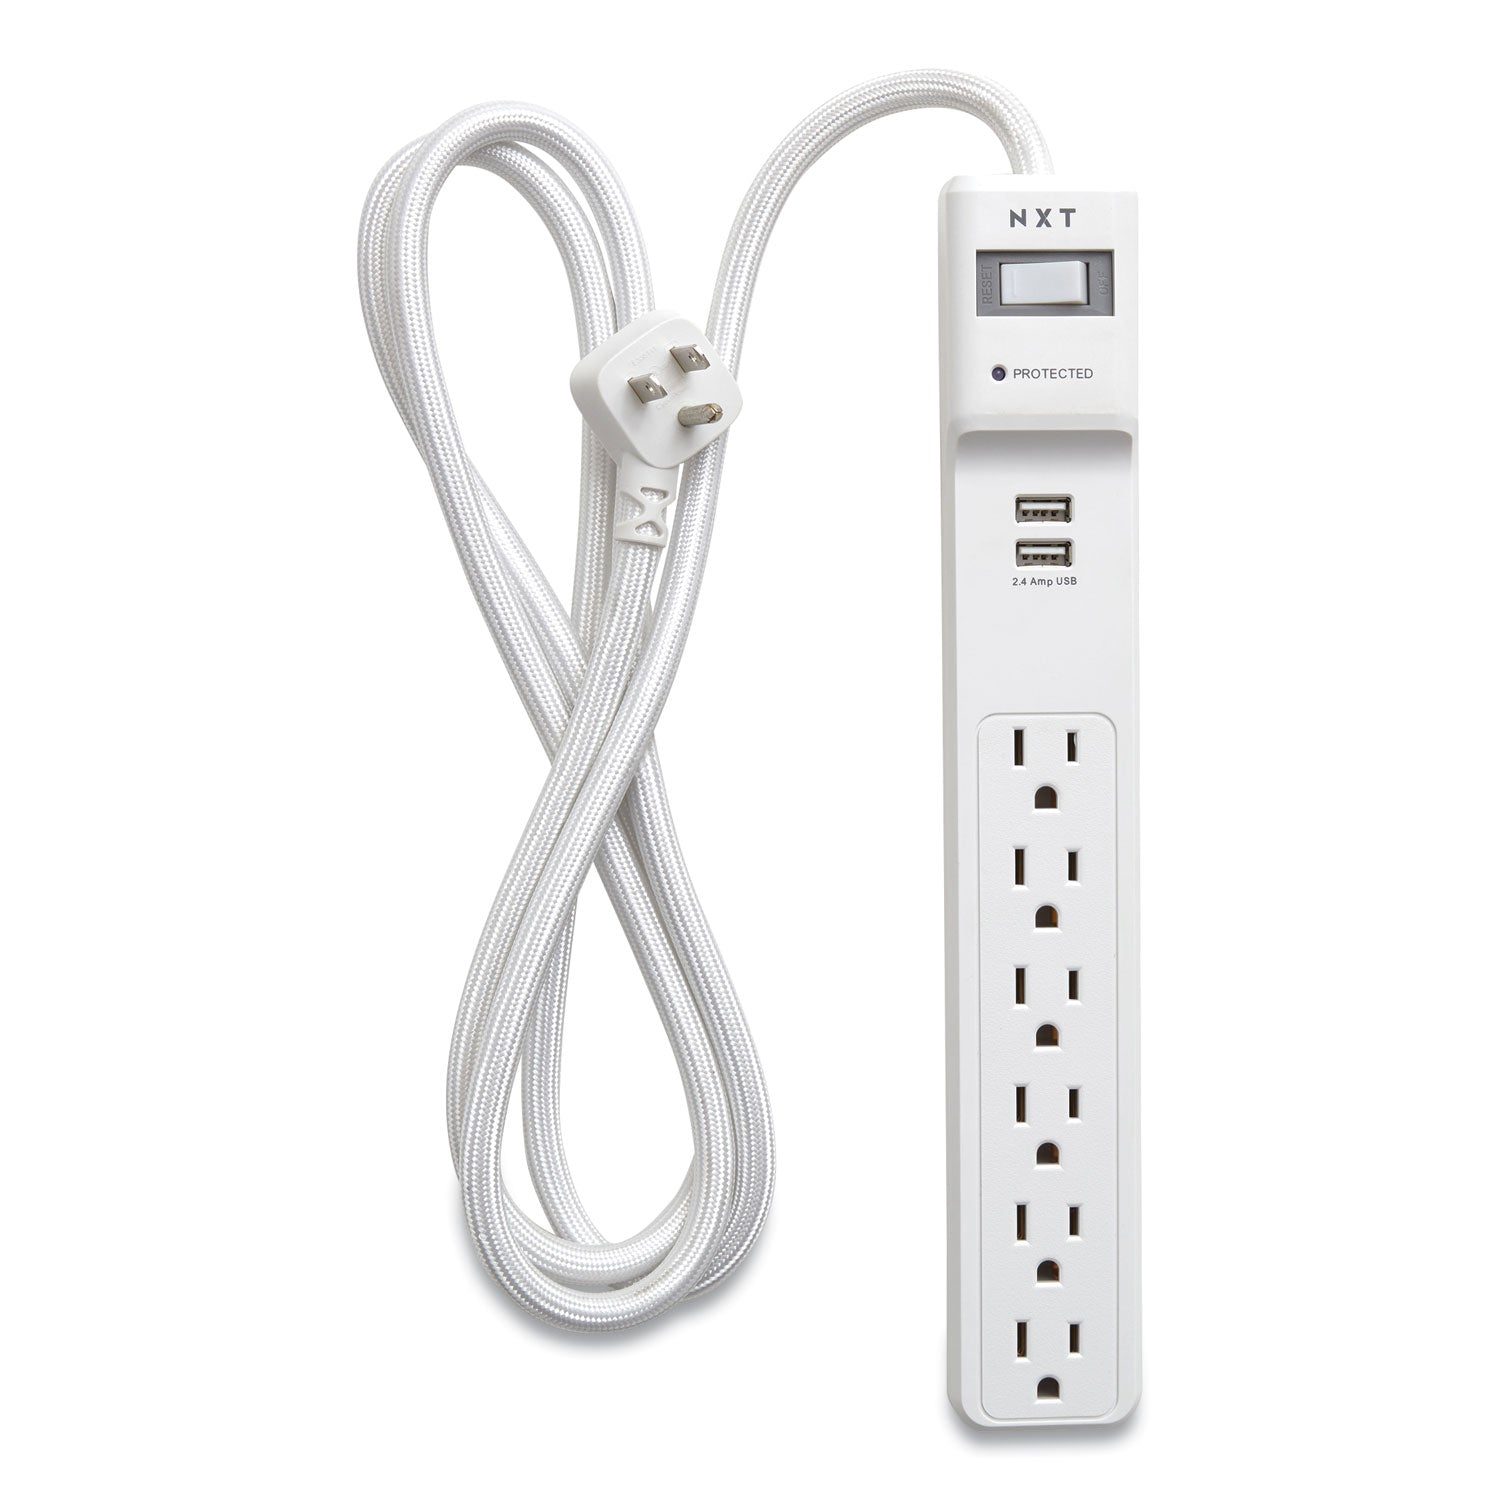 surge-protector-6-ac-outlets-2-usb-ports-6-ft-cord-900-j-white_nxt24324339 - 1